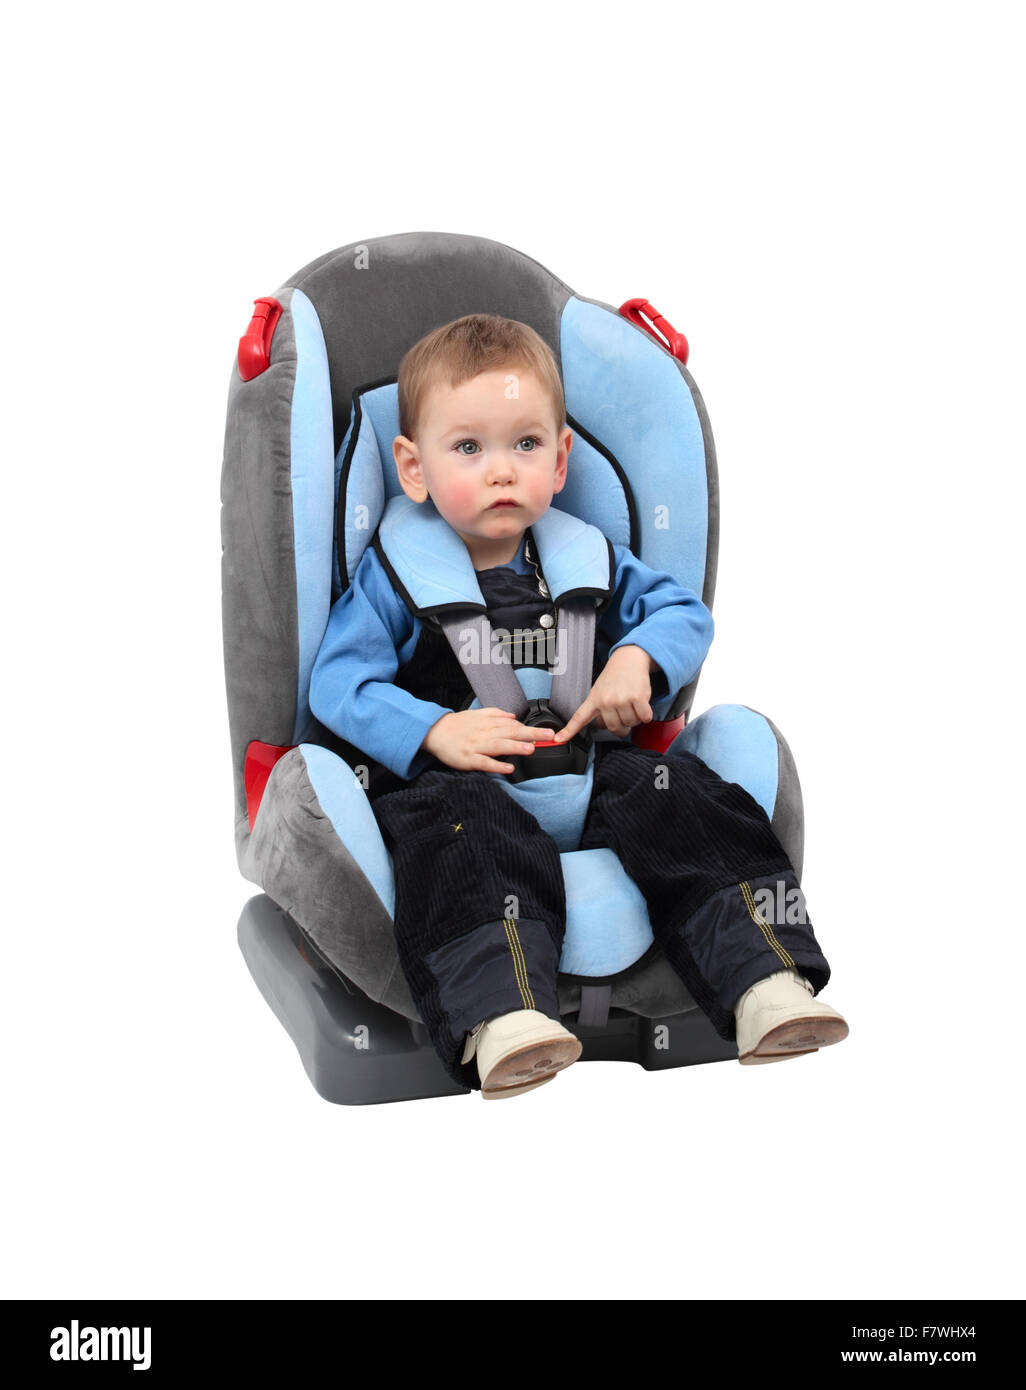 Baby boy in car seat. Isolated with clipping path. Stock Photo